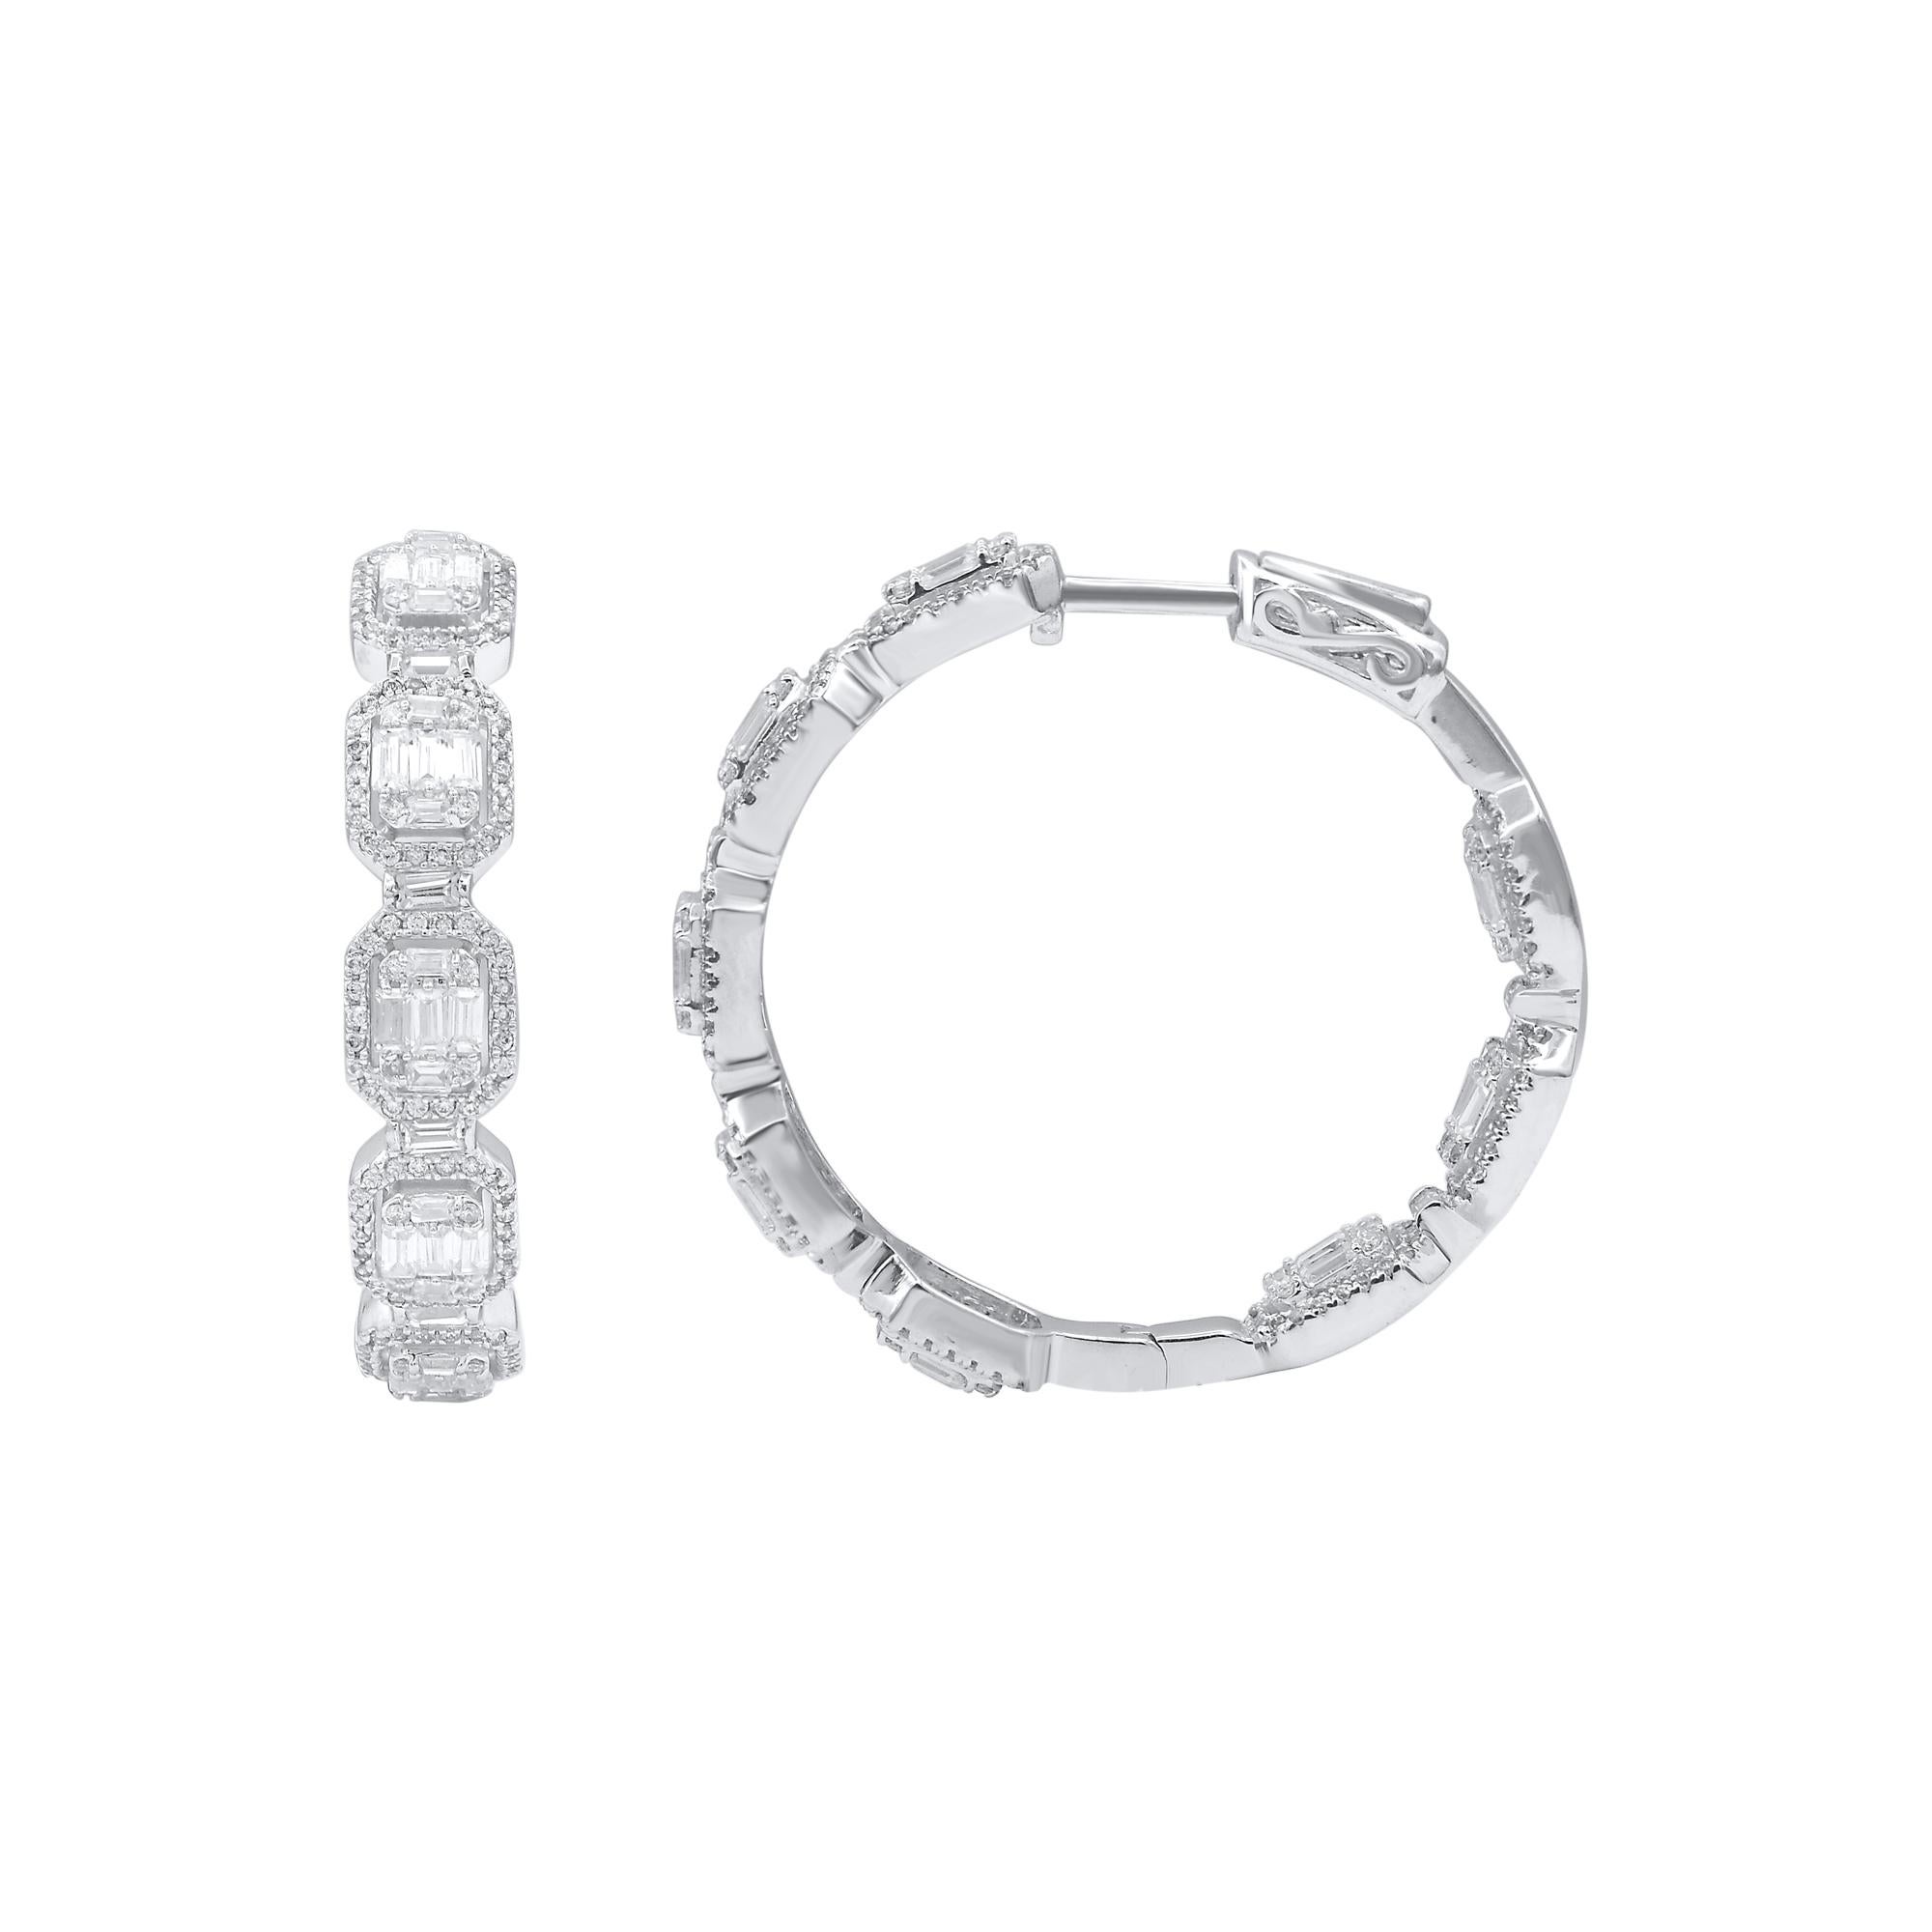 Classic and stylish diamond studded hoop earrings! perfect for daily wear. Crafted in 18 karat white gold with 508 round cut & baguette diamond in prong & channel setting. These earrings secure with hinged backs. The white diamonds are graded as H-I